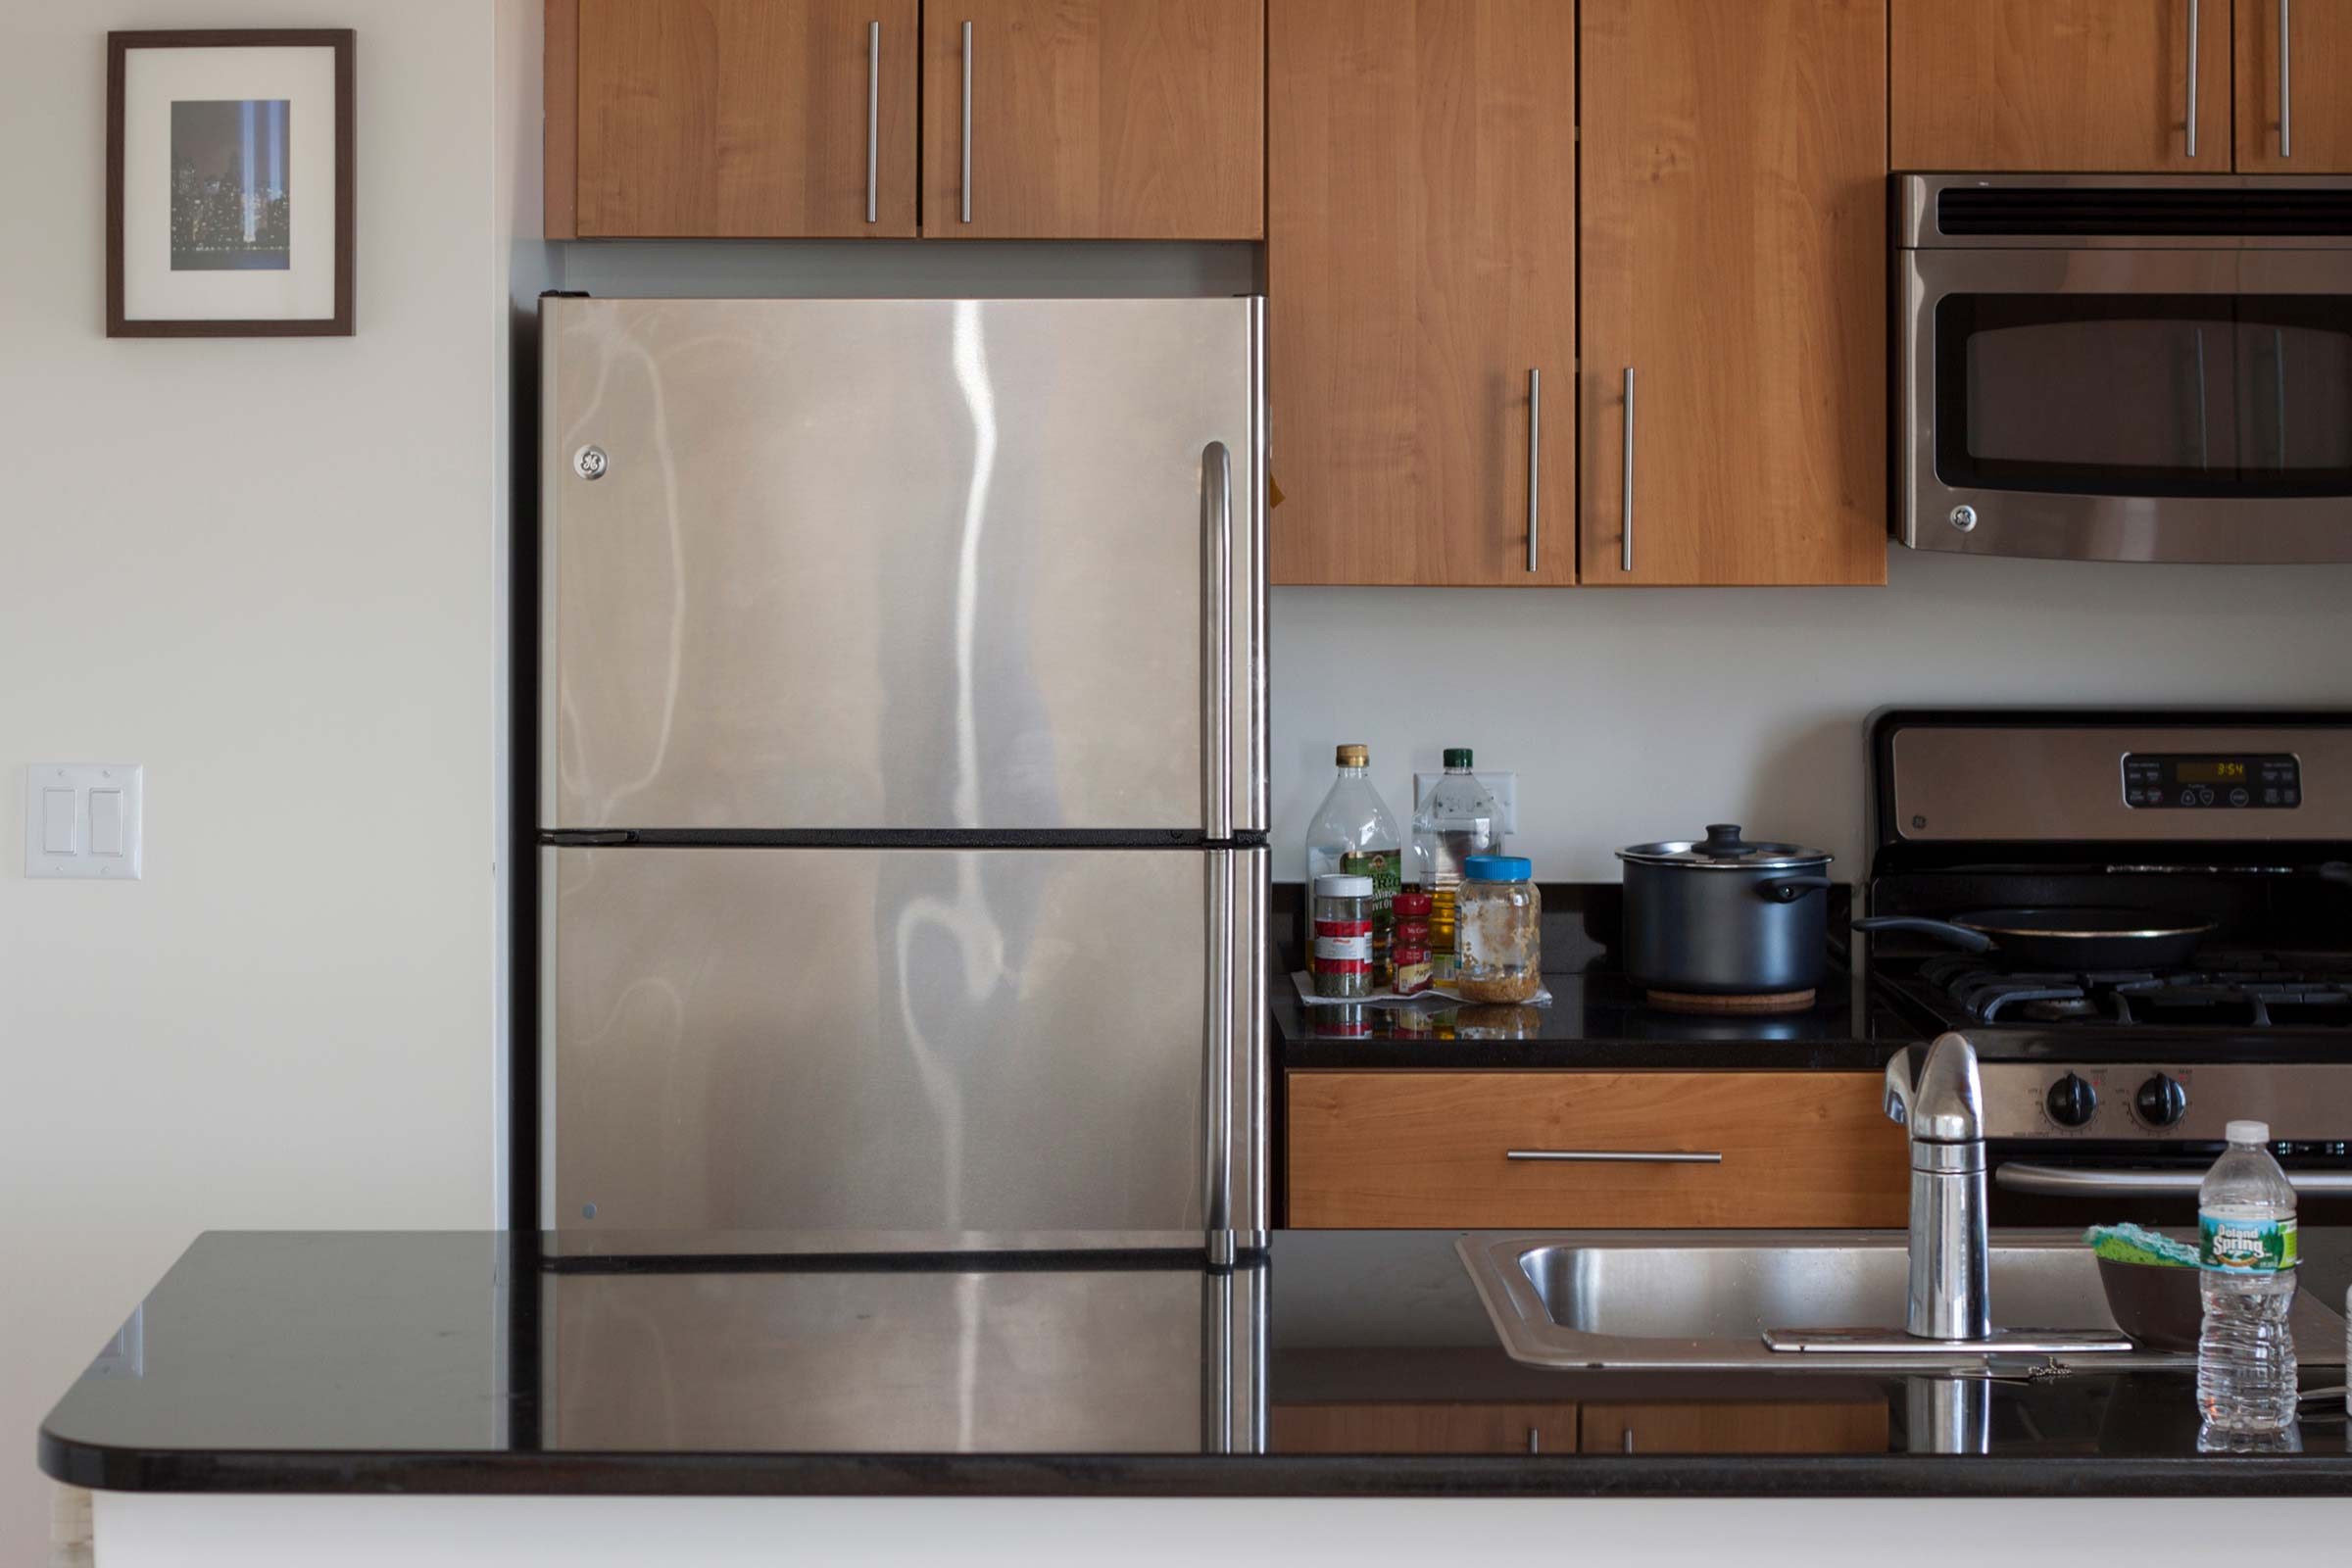 How long does a refrigerator last?